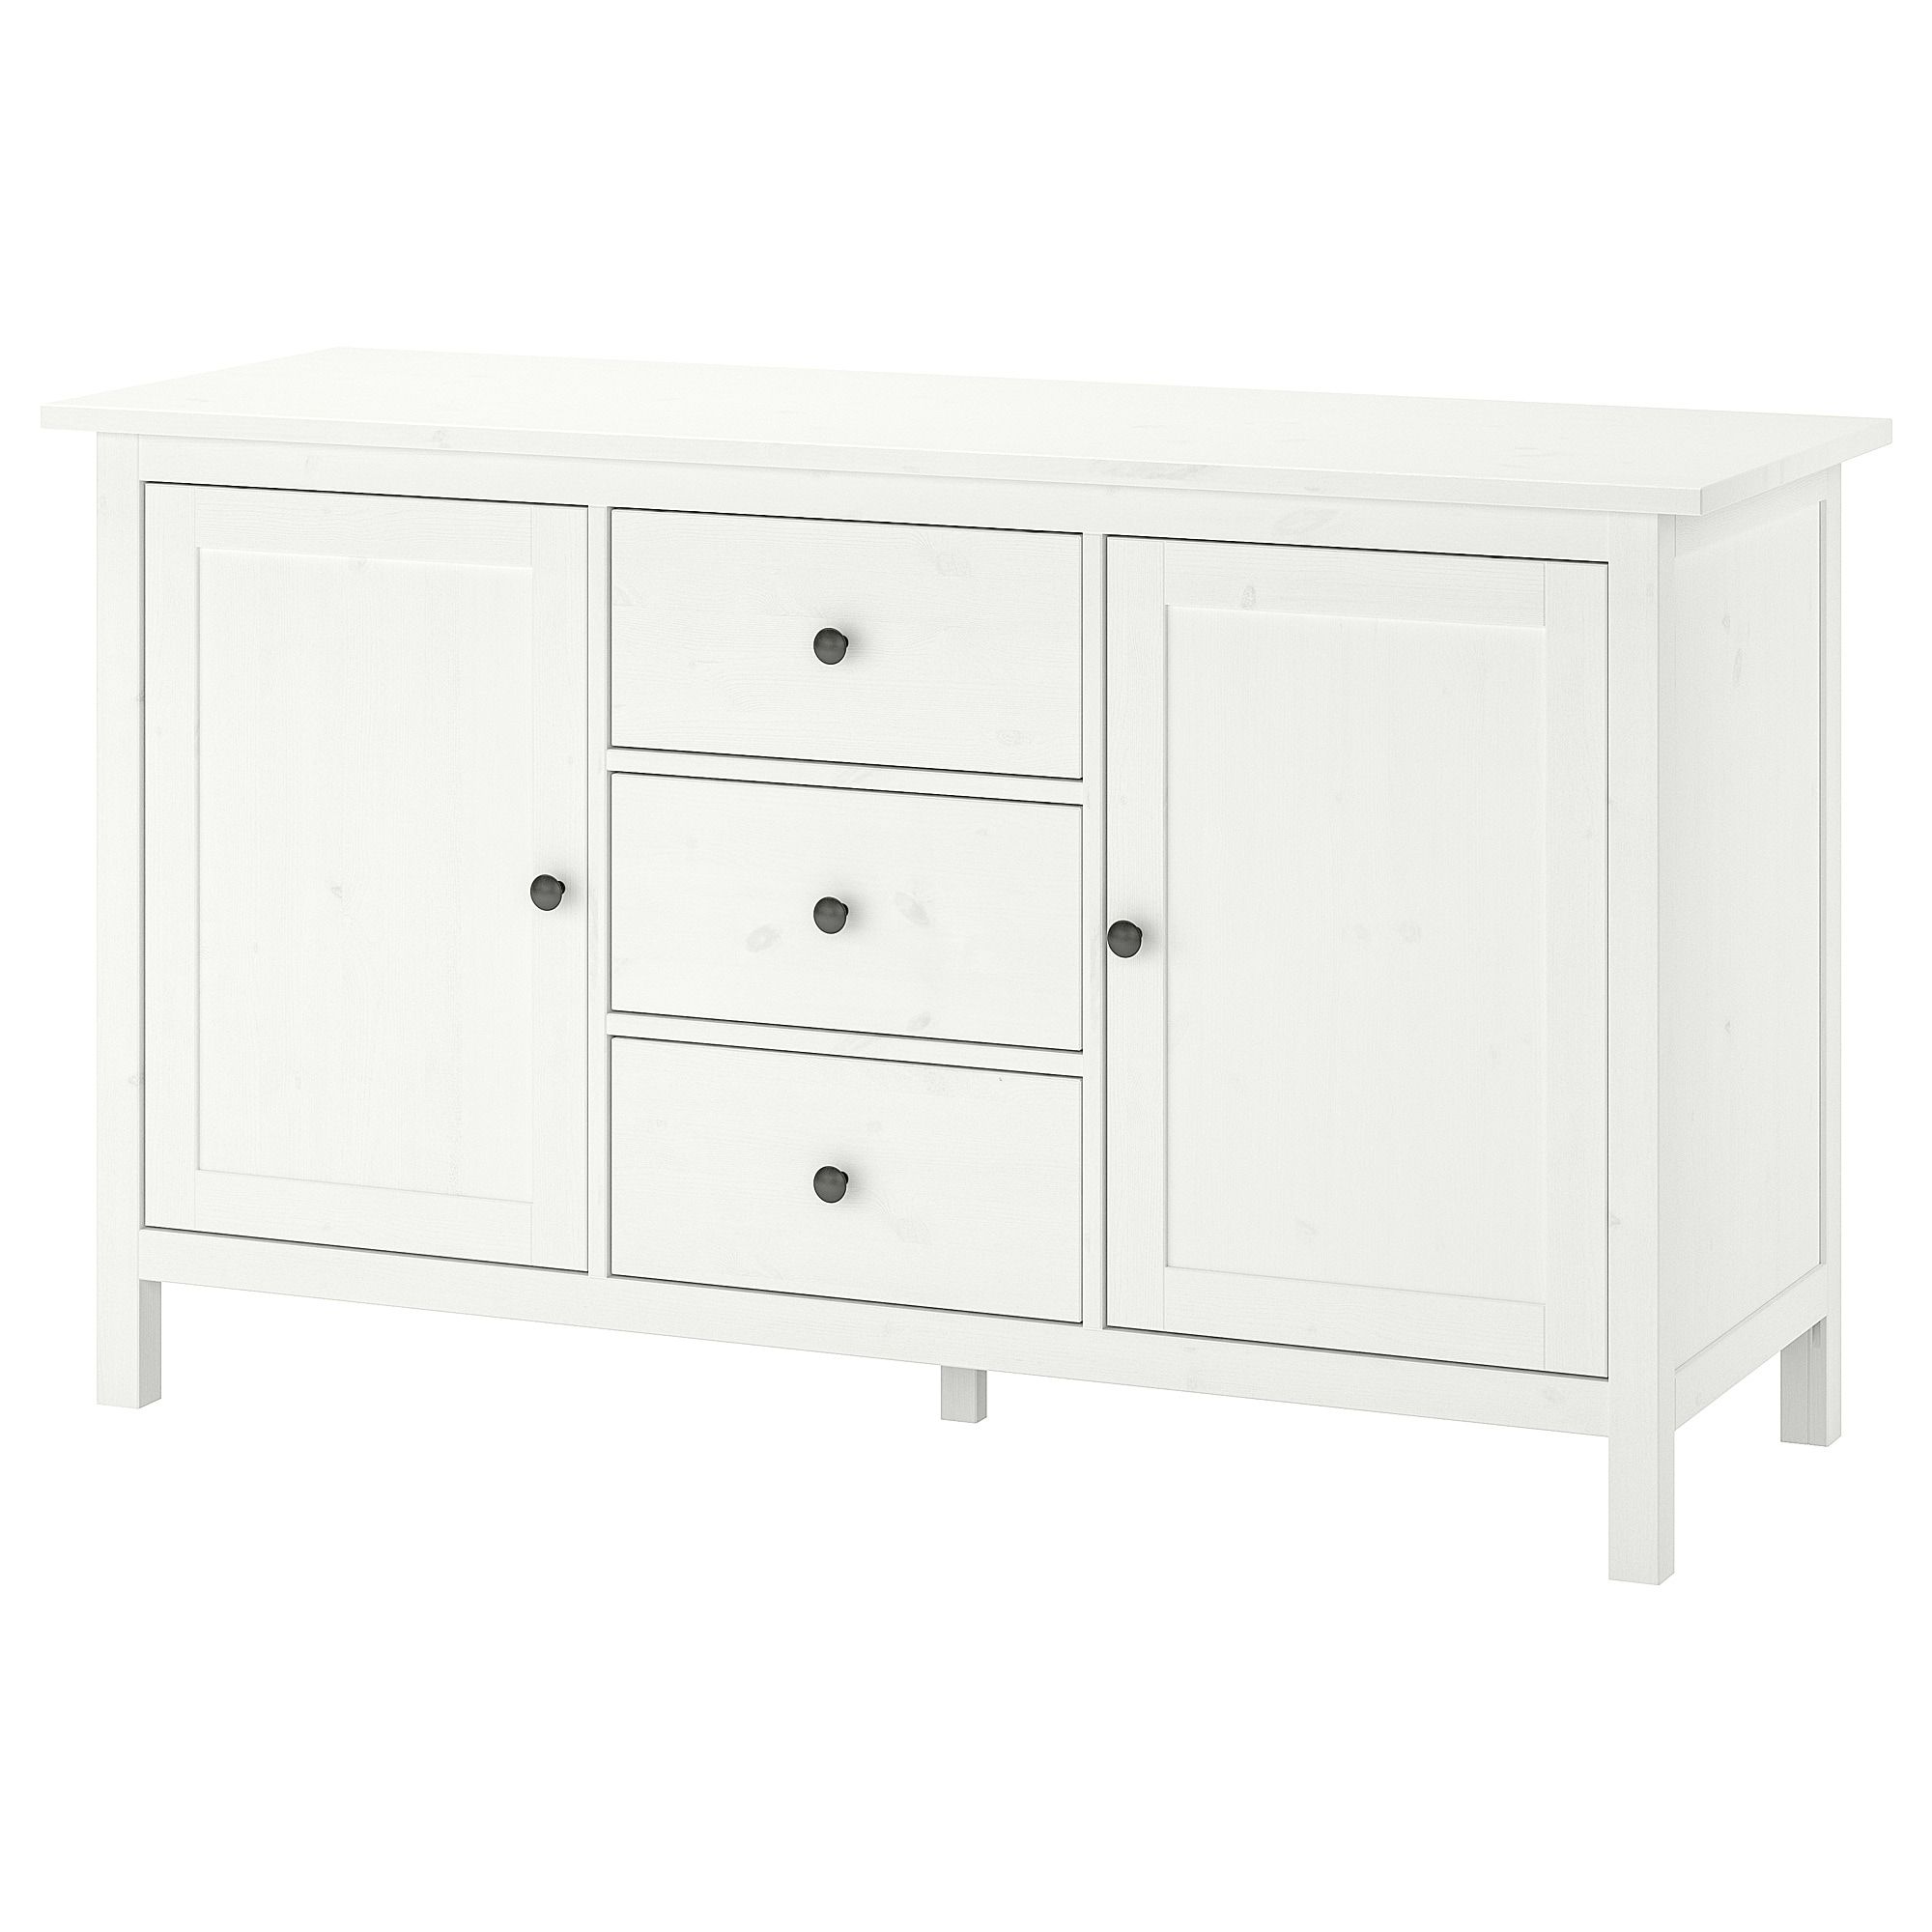 Sideboard Hemnes White Stain With Regard To South Miami Sideboards (View 10 of 30)